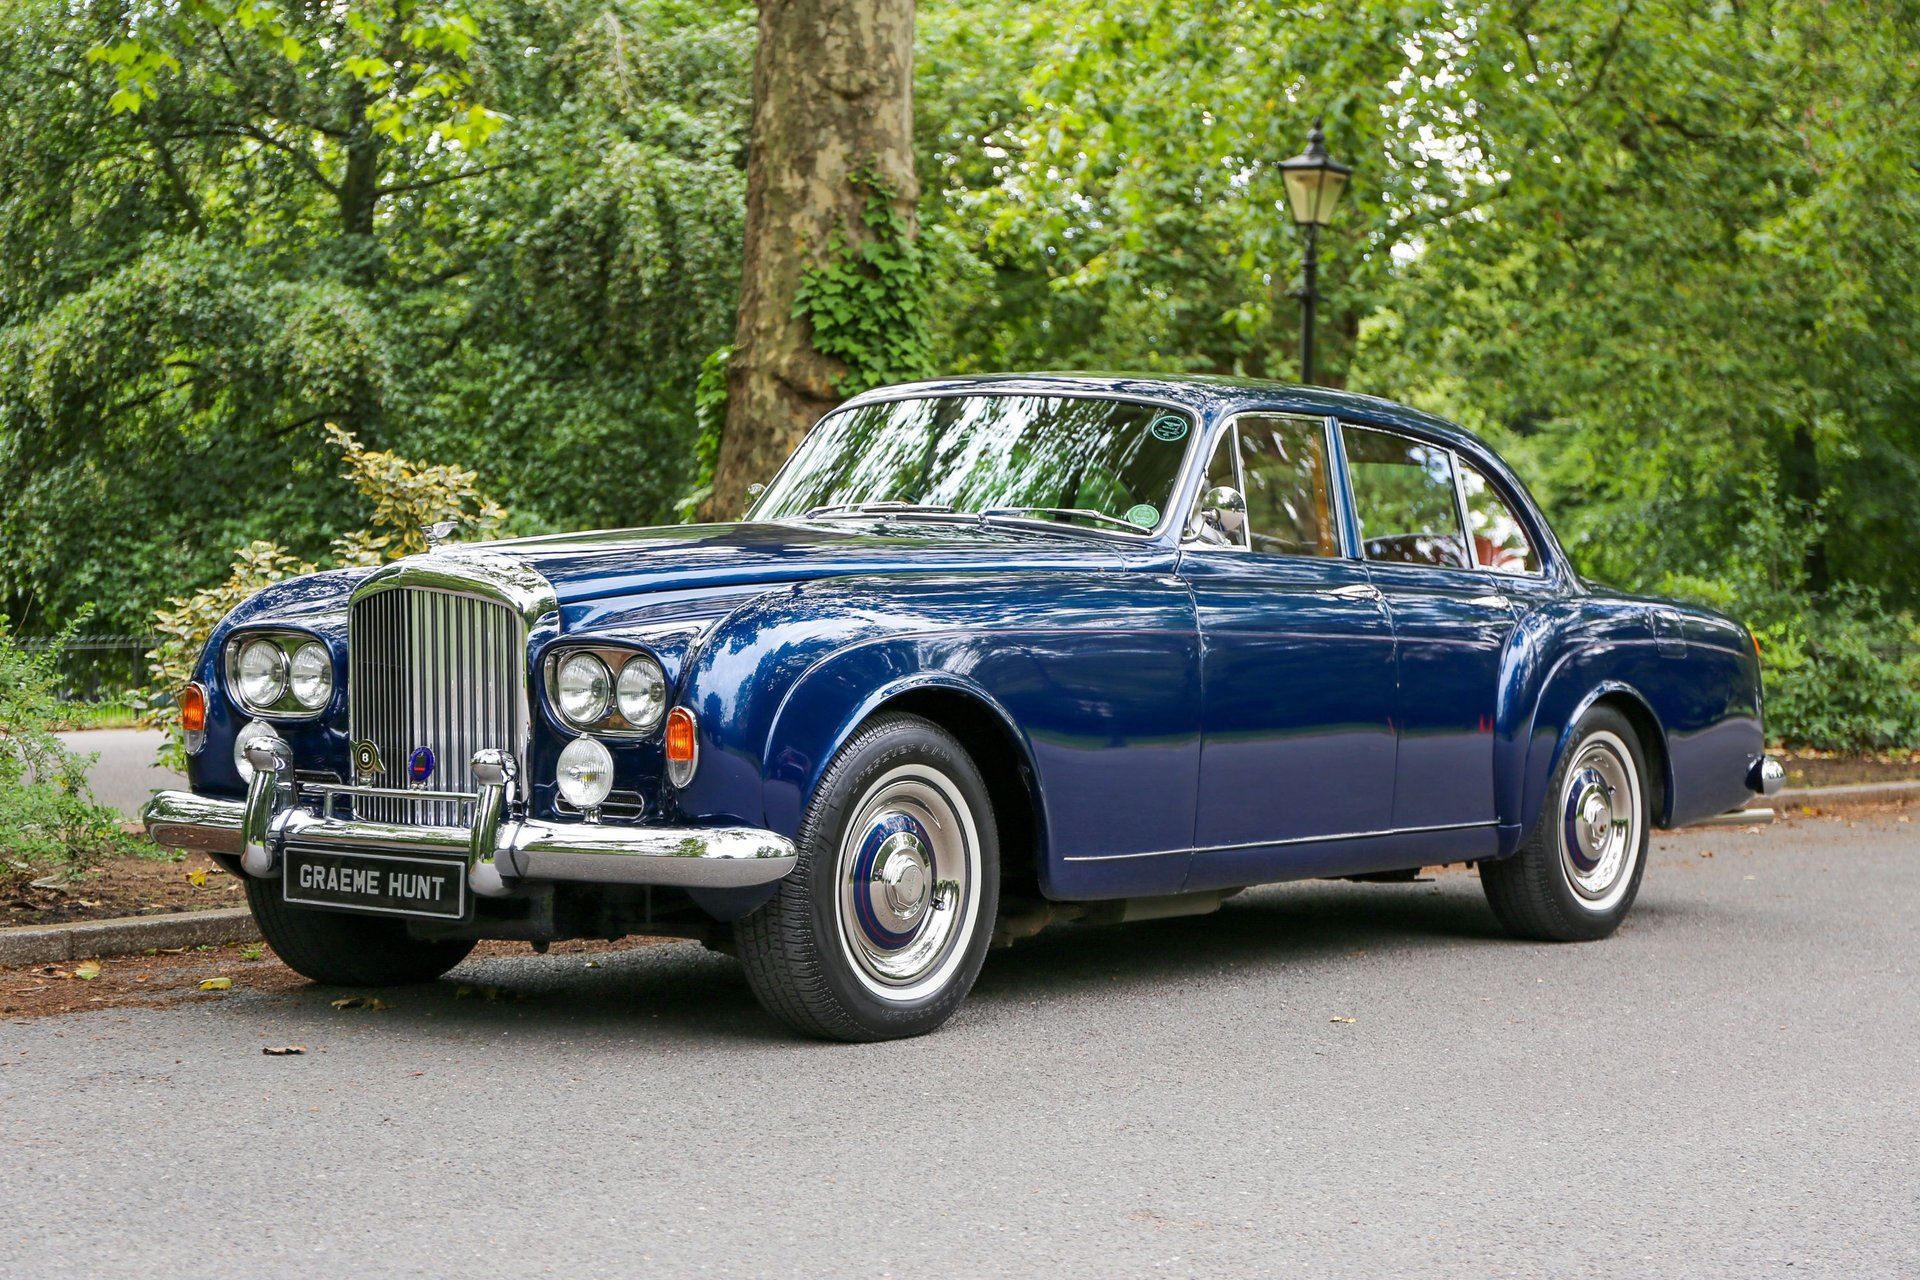 Bentley s3 continental flying spur st o2lvysgc4inzx6wjuq